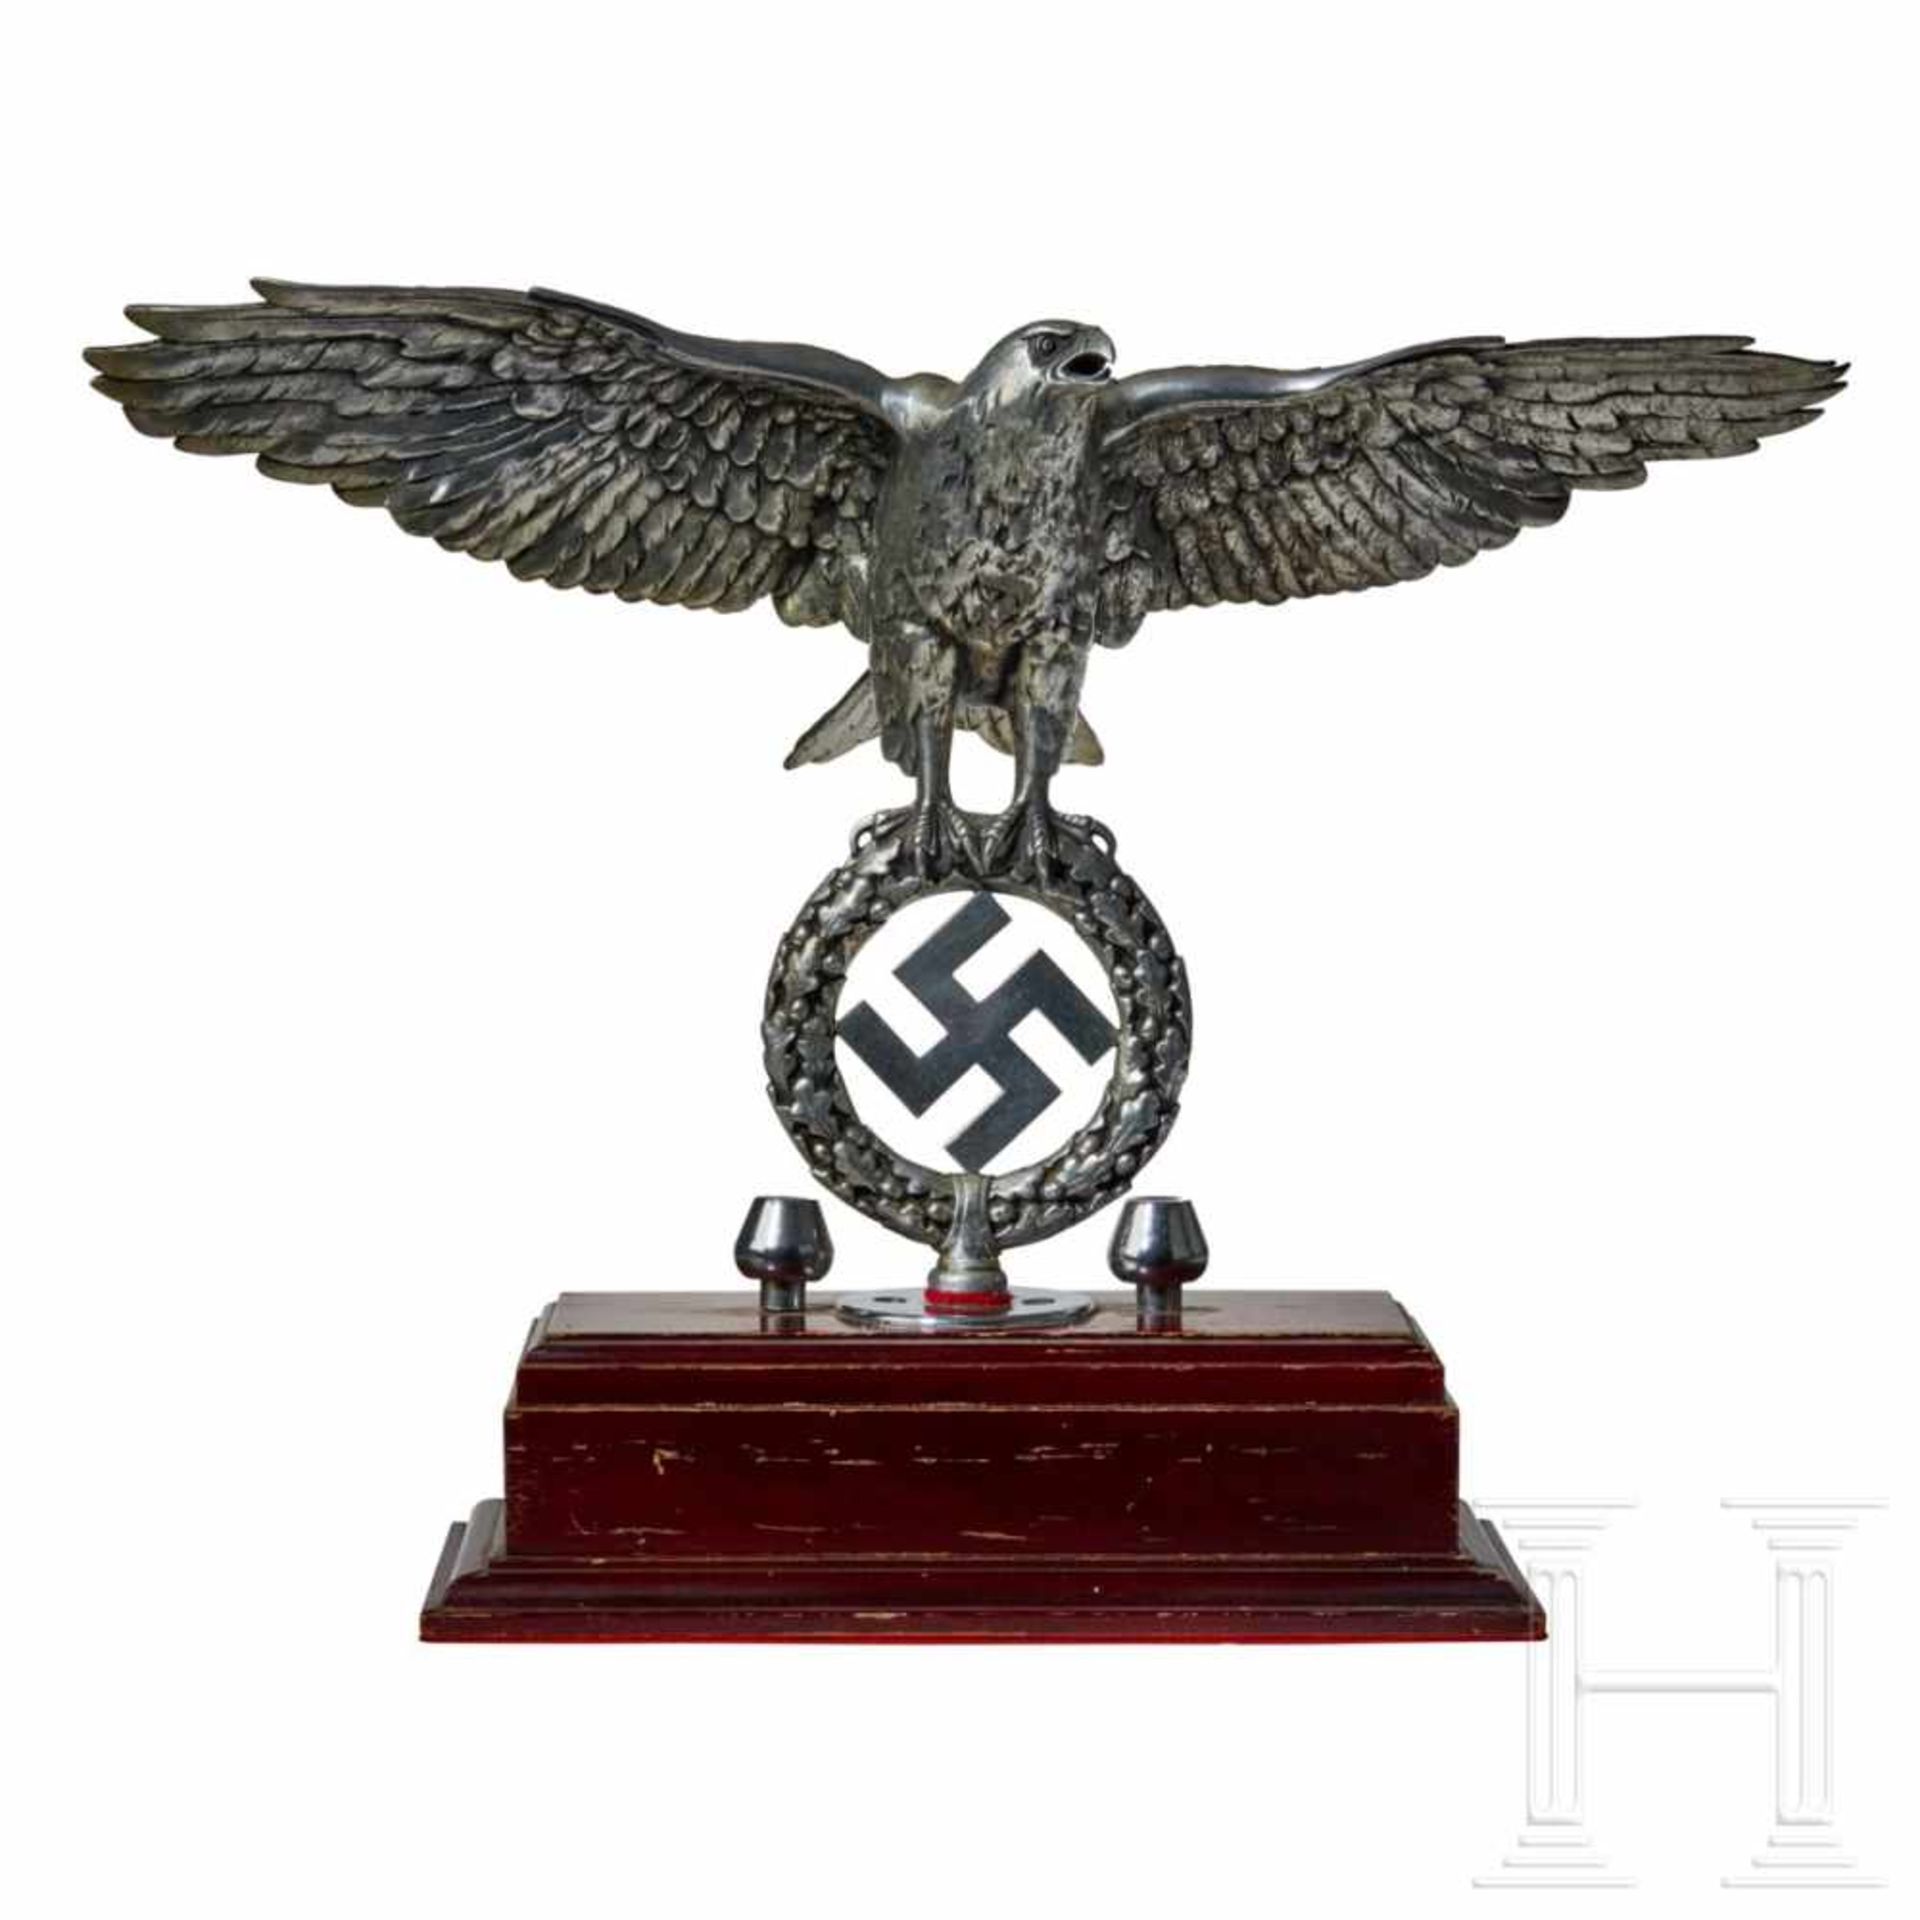 An Eagle for Jingling Johnny (Schellenbaum) of the ArmyPolished aluminum, the eagle with